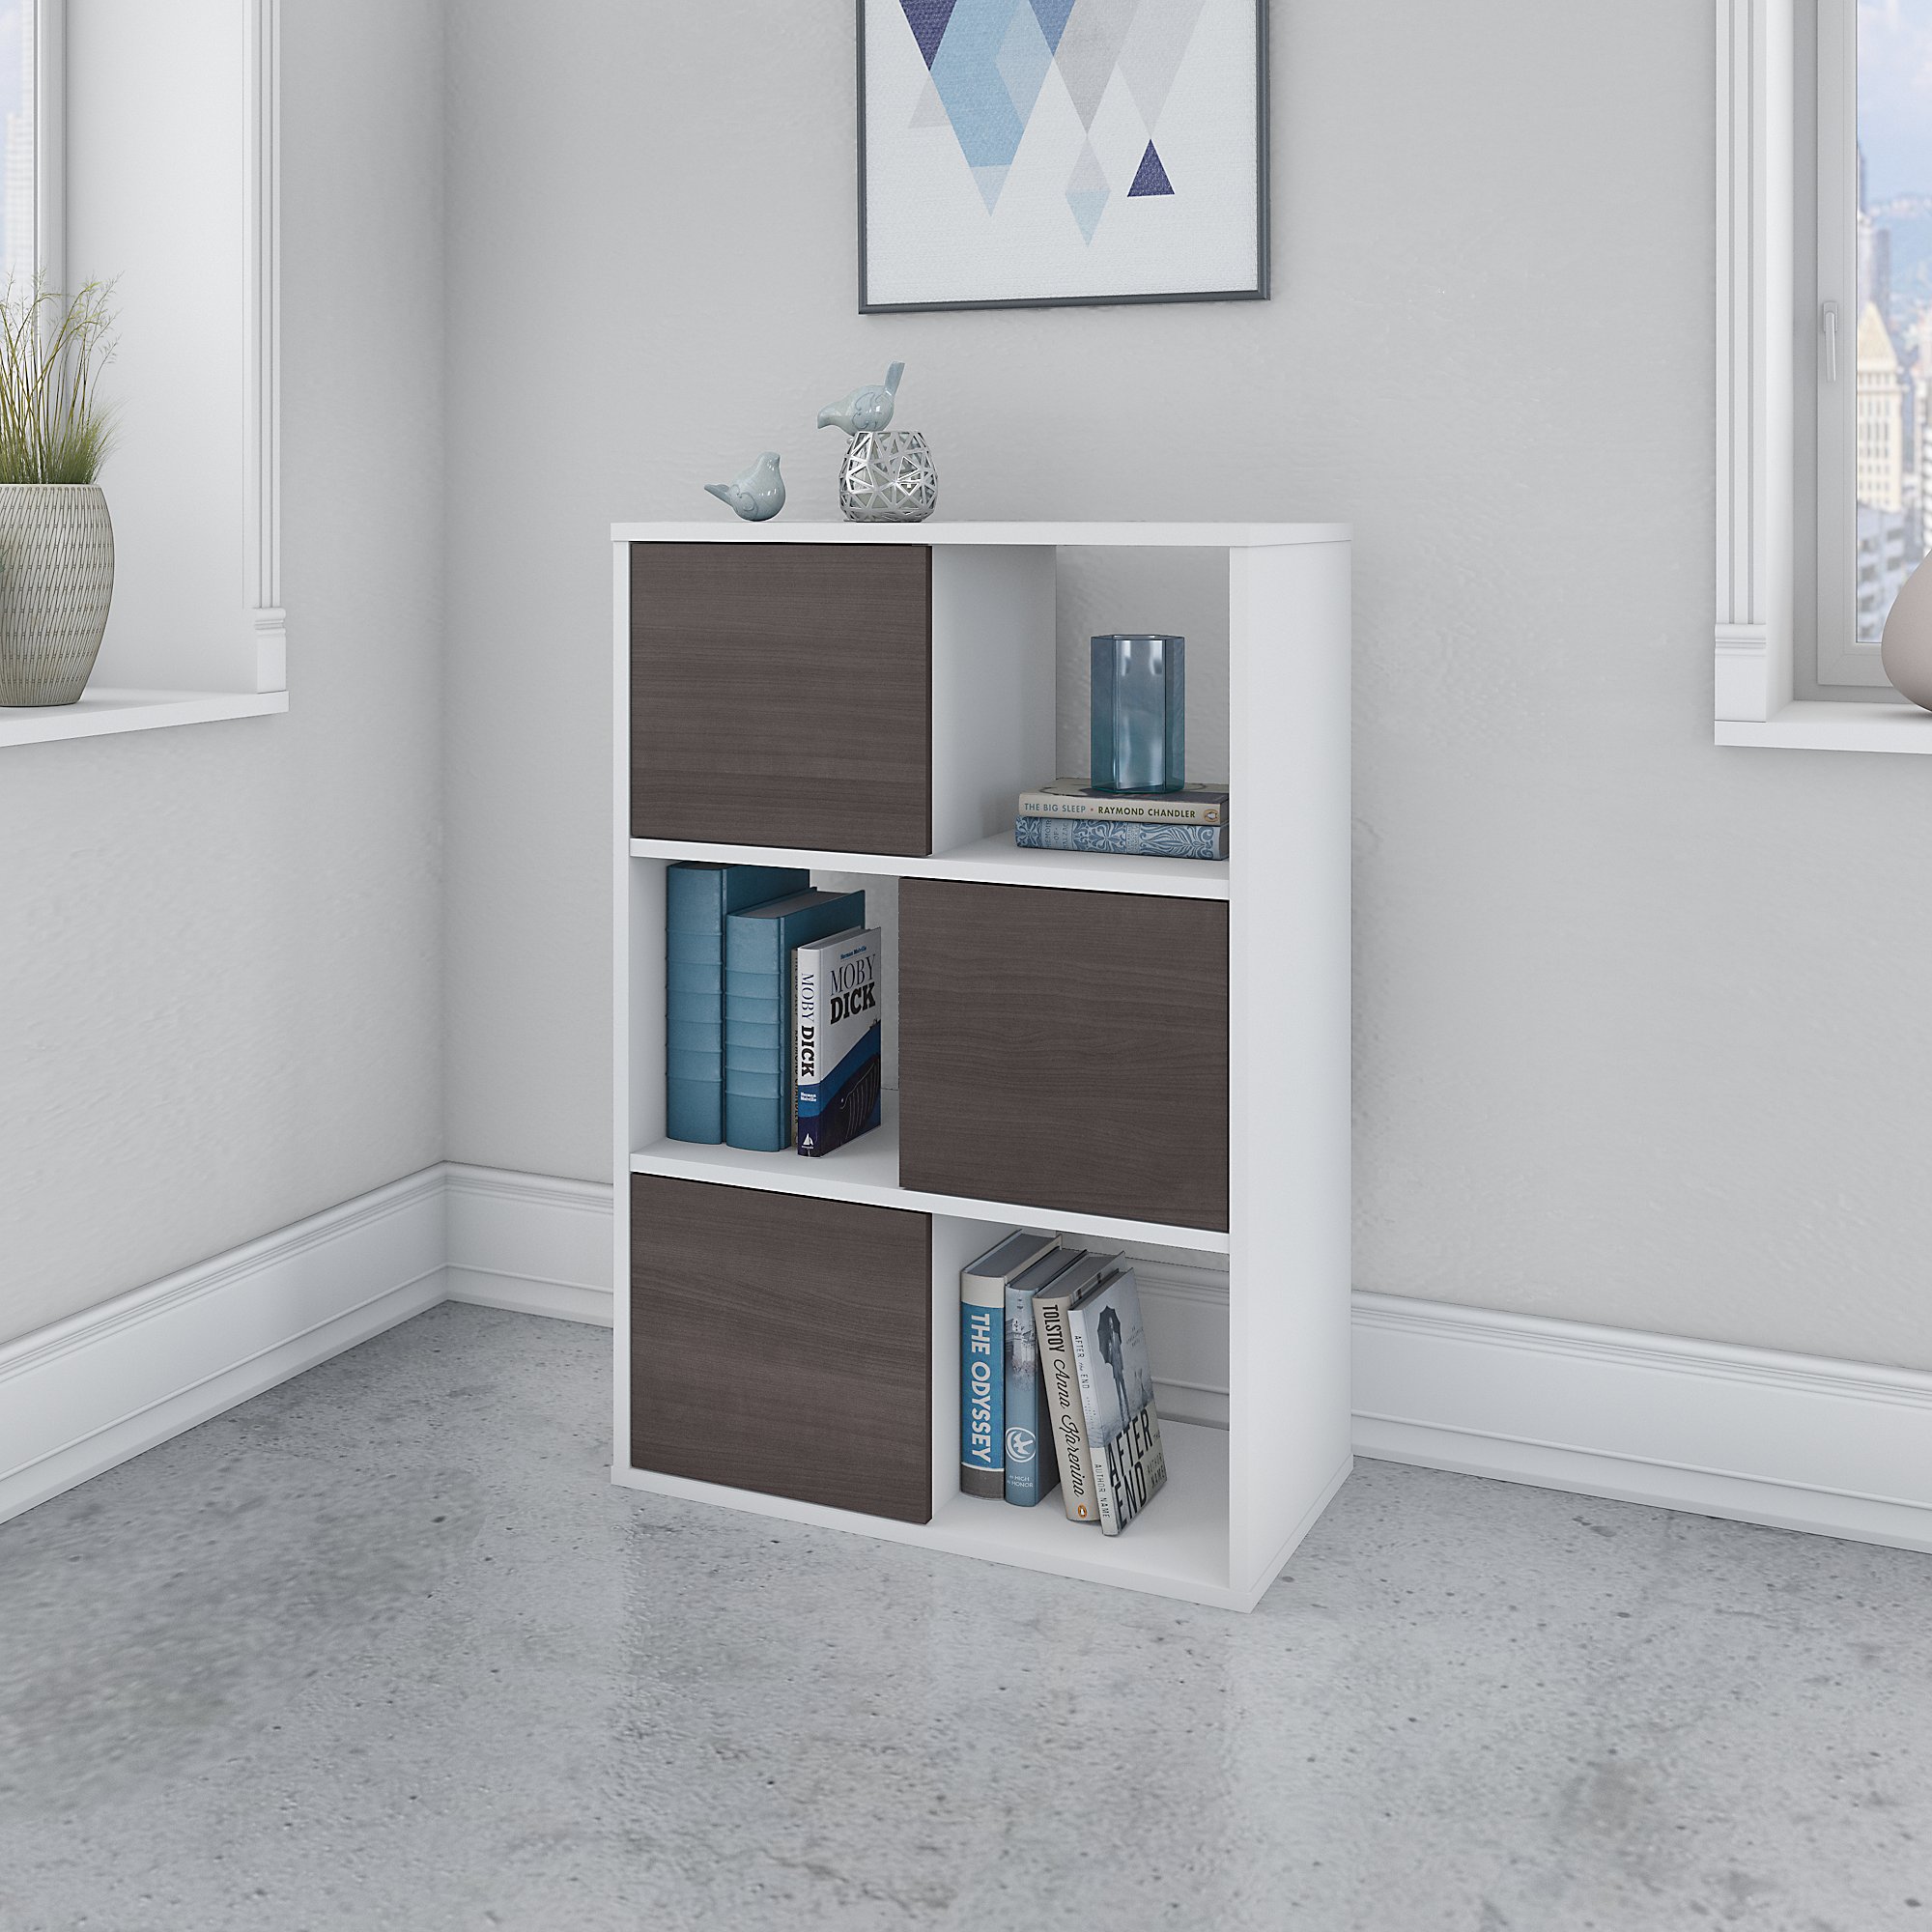 New Lokken Shelving Unit & Storage Tub Place it in your Living & Dining Room. 